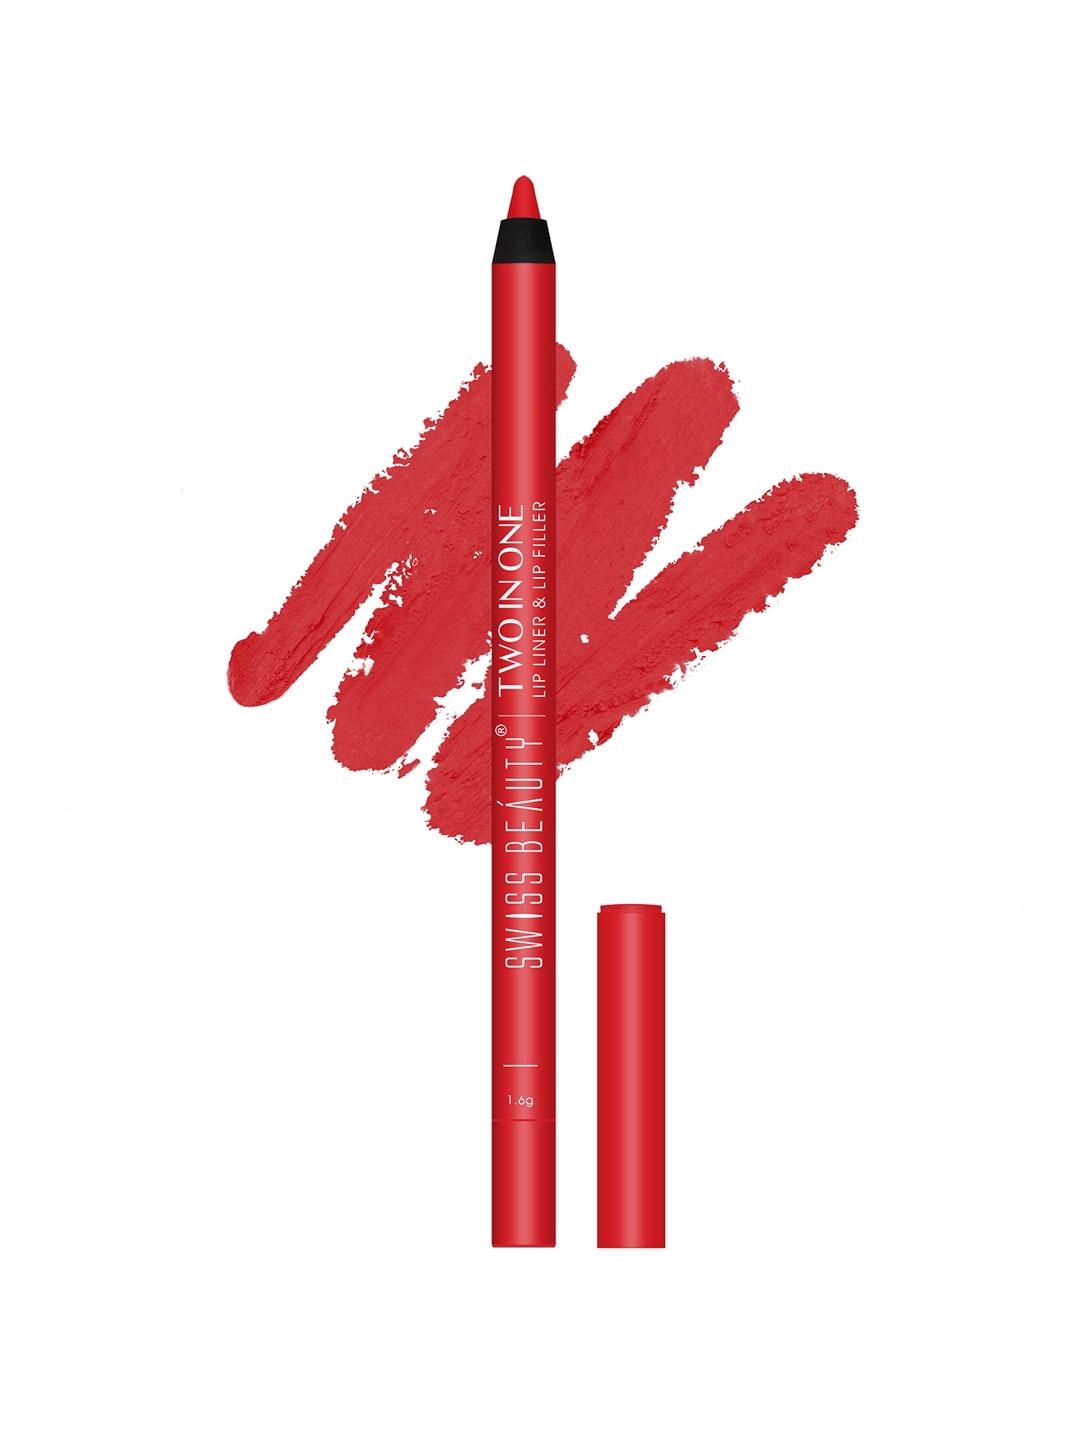 swiss beauty two in one smudge-proof waterproof lip liner & lip filler 1.6g - hot red